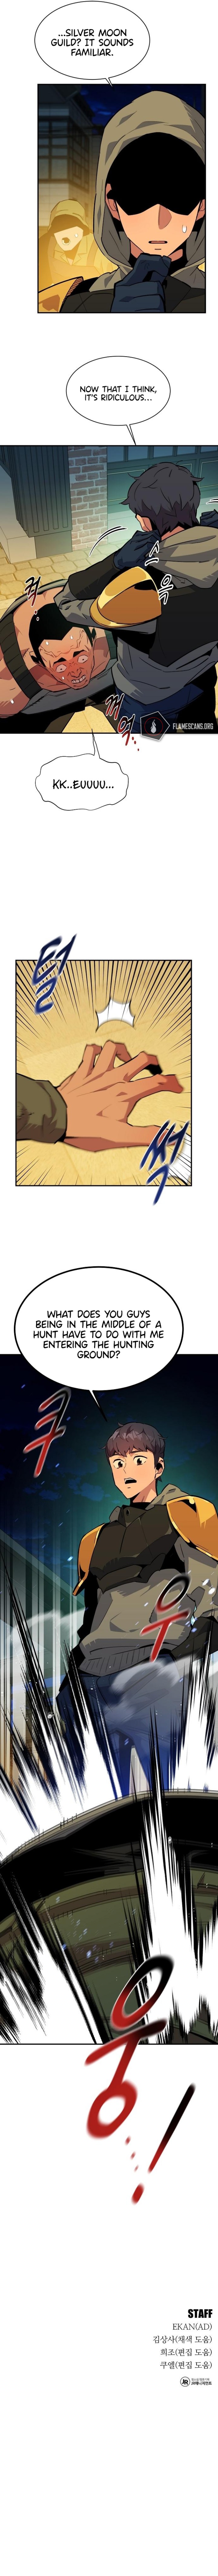 Auto-Hunting With Clones - Chapter 30 Page 16